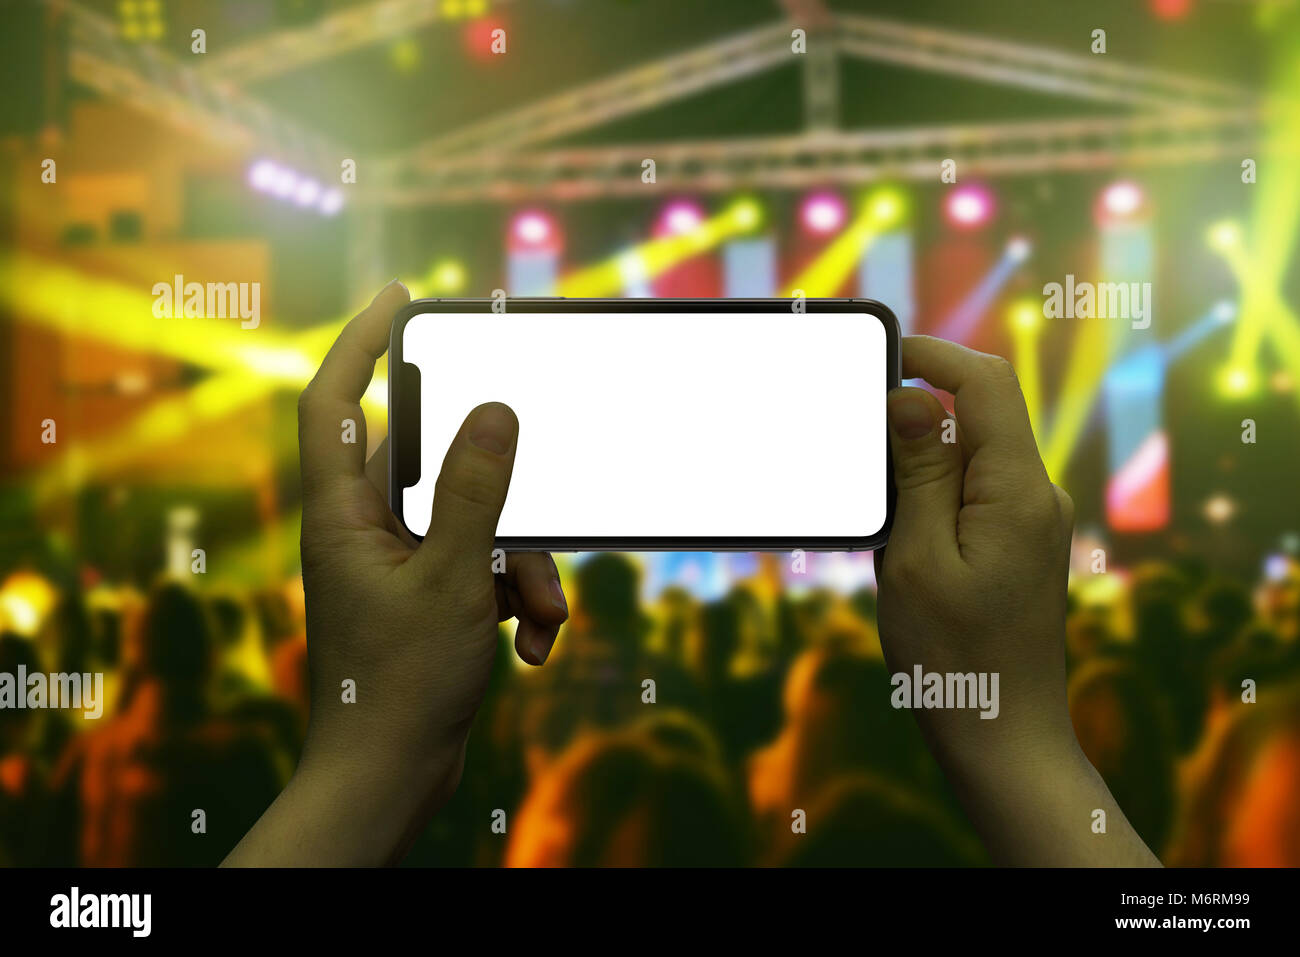 Modern smart phone in woman hand. Live music concert in background. Stock Photo